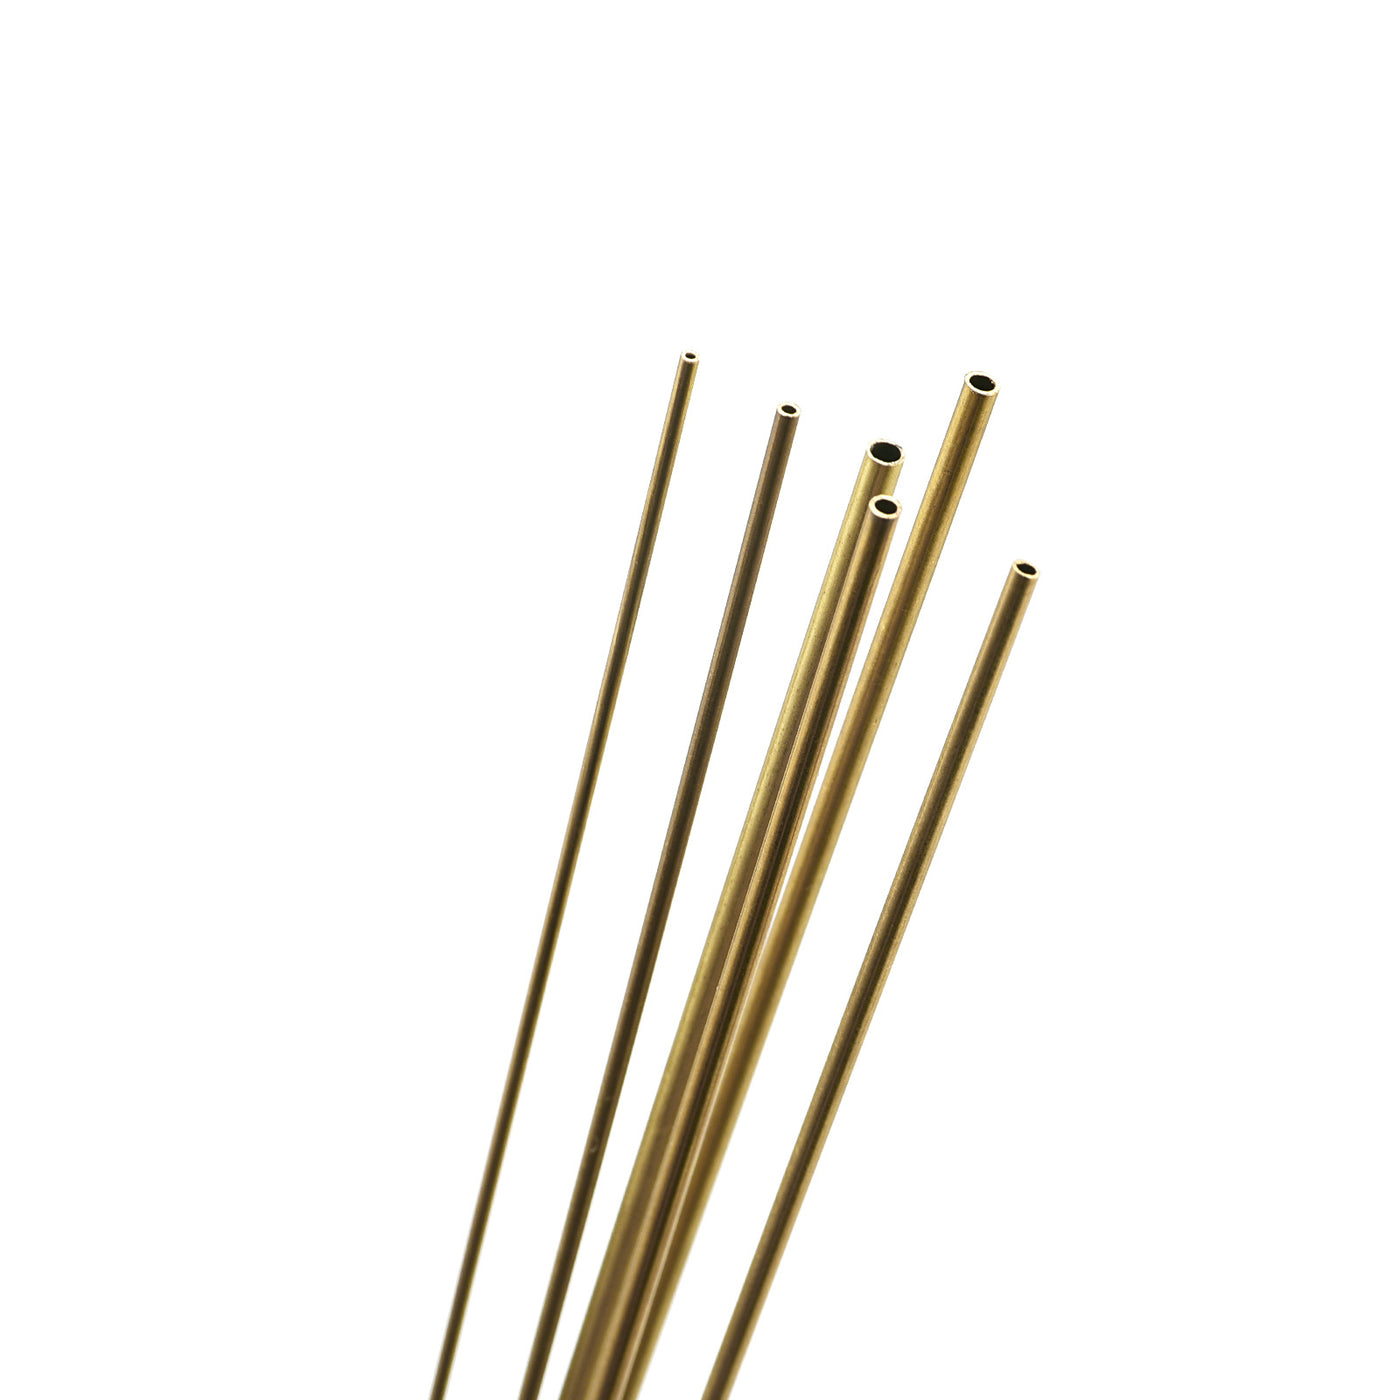 uxcell Uxcell Brass Tube, 1mm 1.2mm 1.4mm 1.6mm 1.8mm 2mm OD x 0.2mm Wall Thickness 300mm Length Metal Tubing, Pack of 6